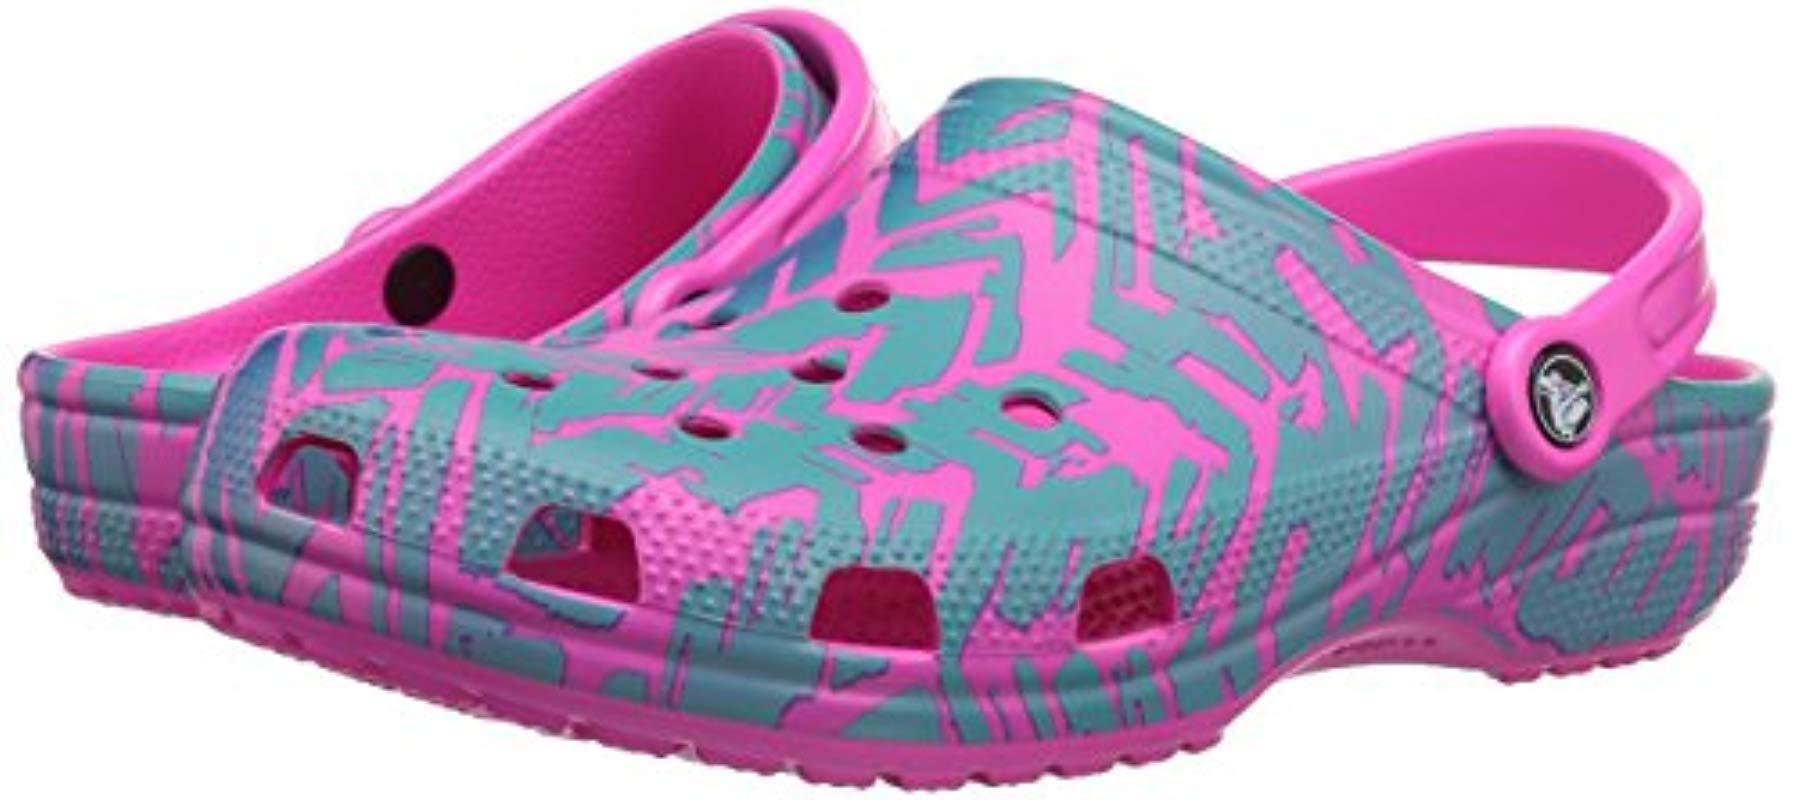 crocs pink and blue